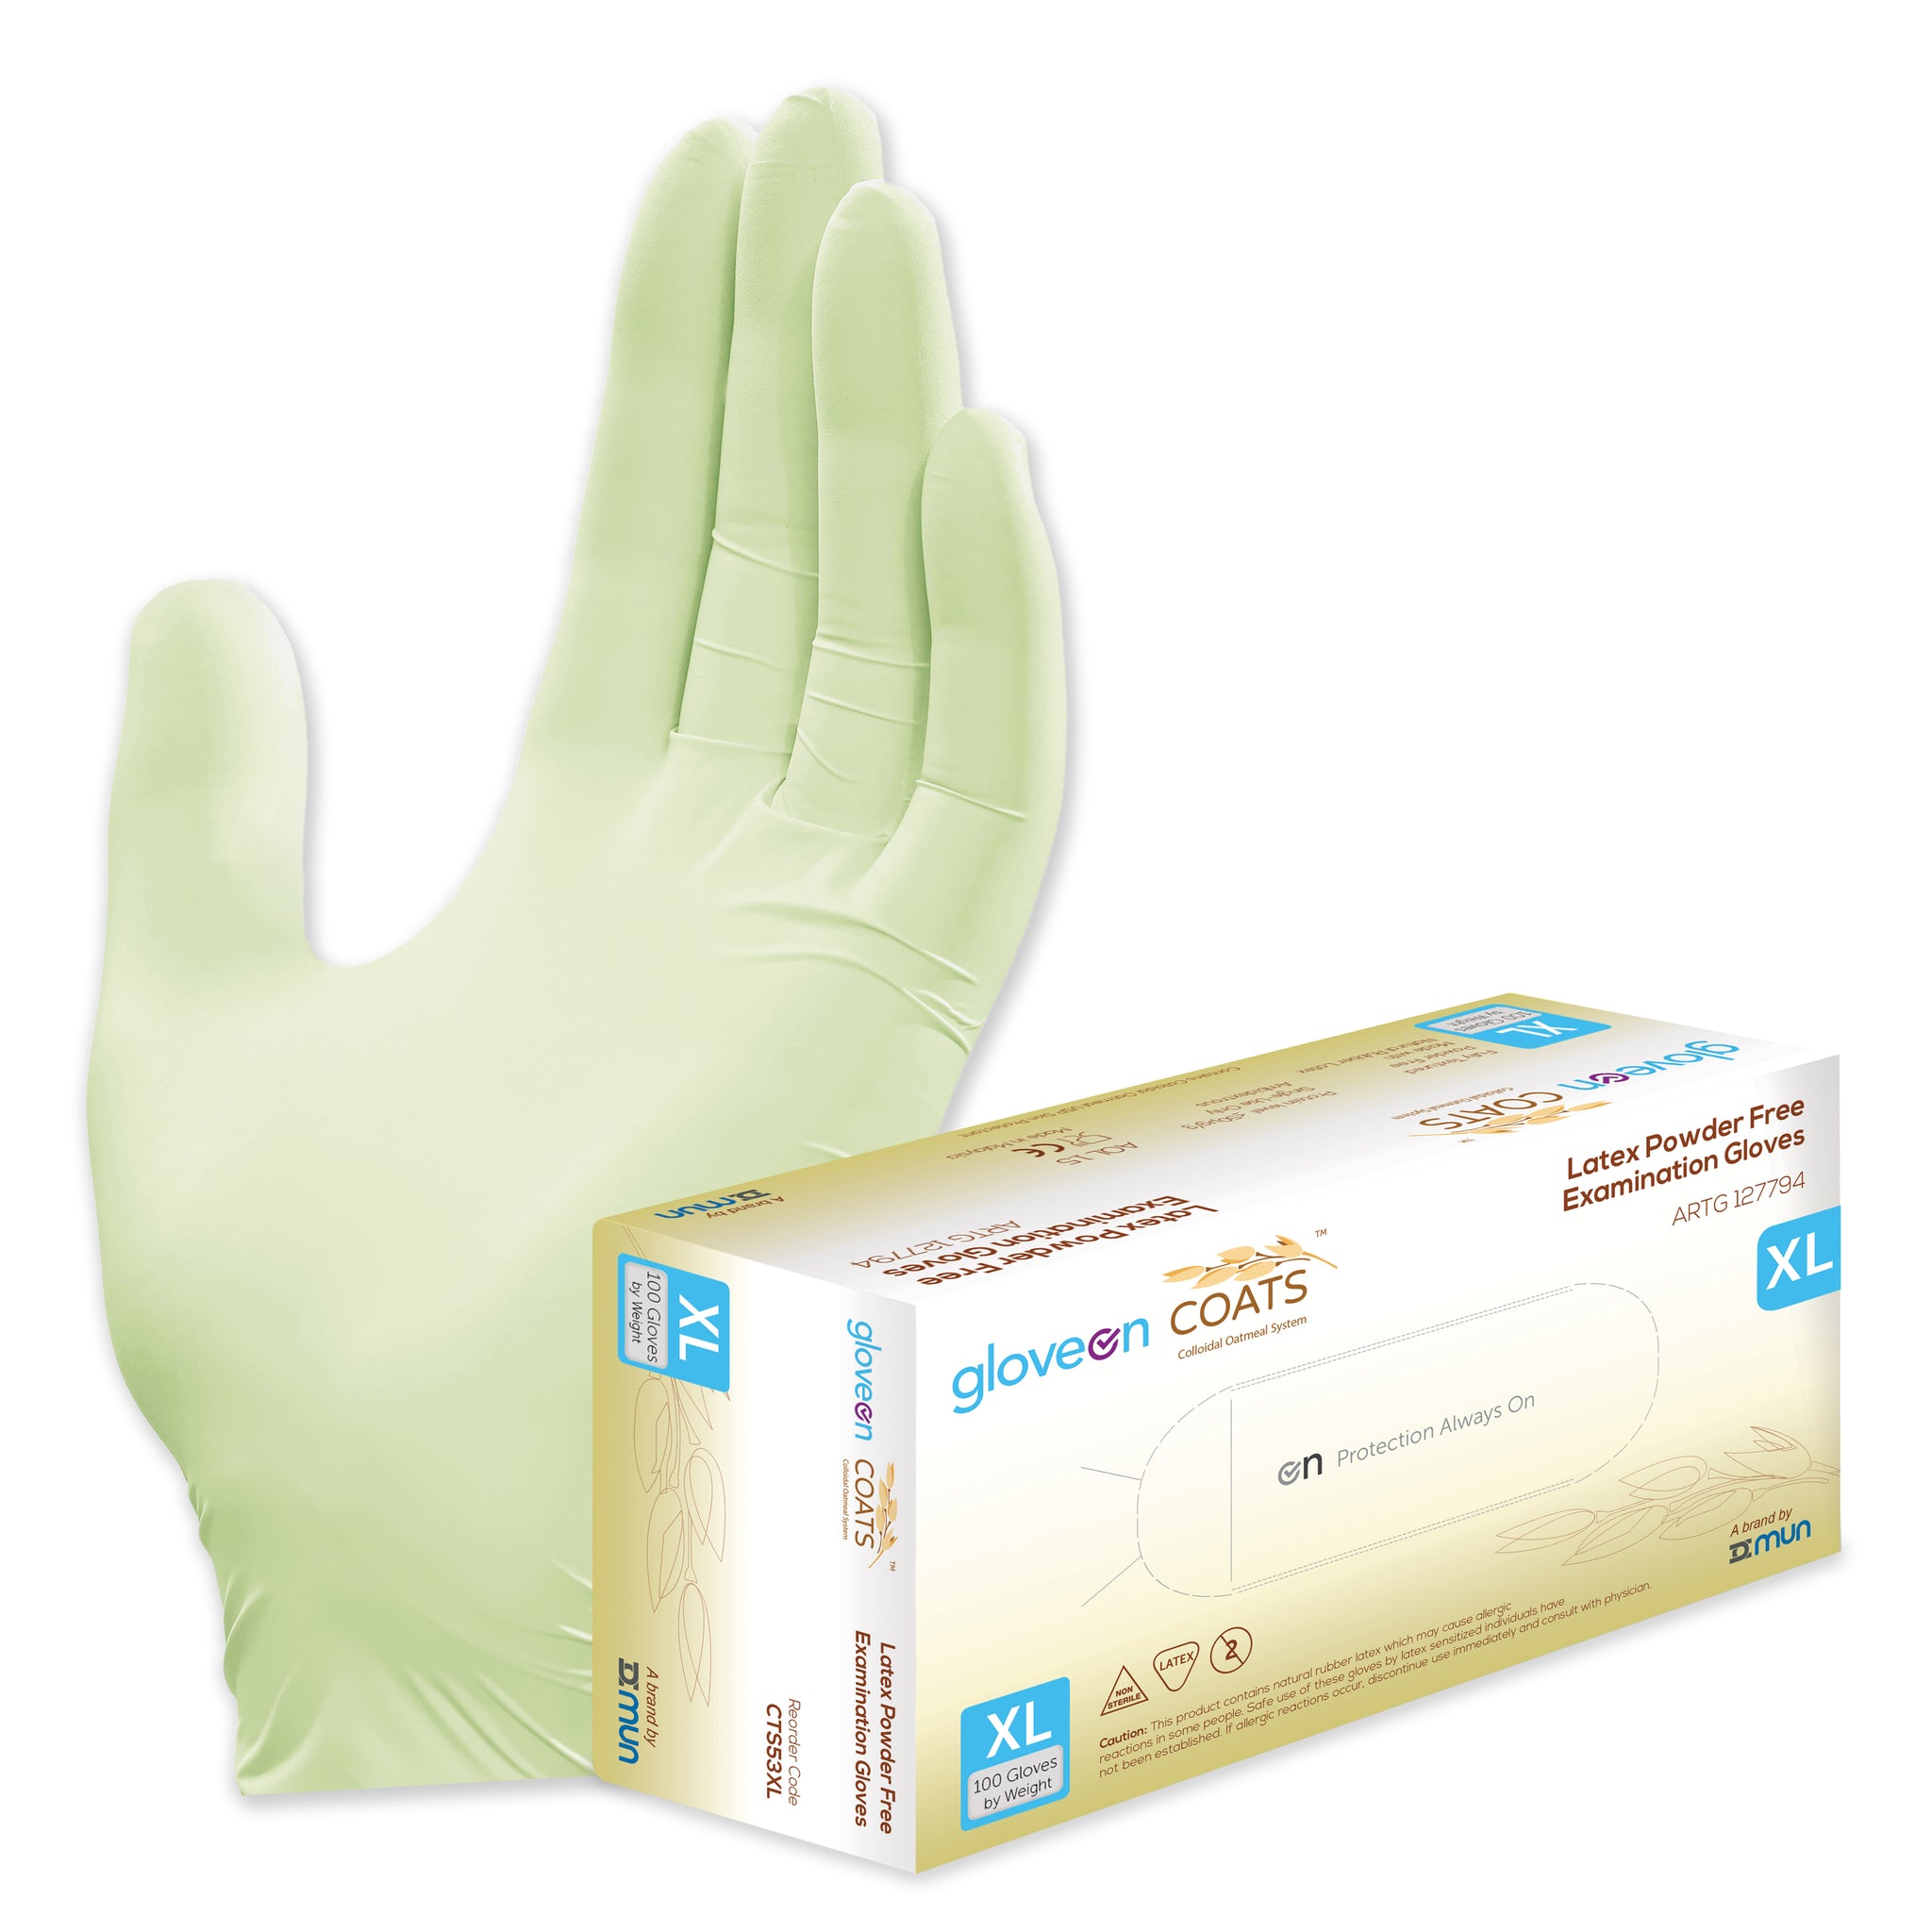 Latex Exam Gloves with Colloidal Oatmeal System, Powder Free, Non-Sterile, Fully Textured, Colloidal Oats Coated, Standard Cuff, Lime Green - Box of 100, XL